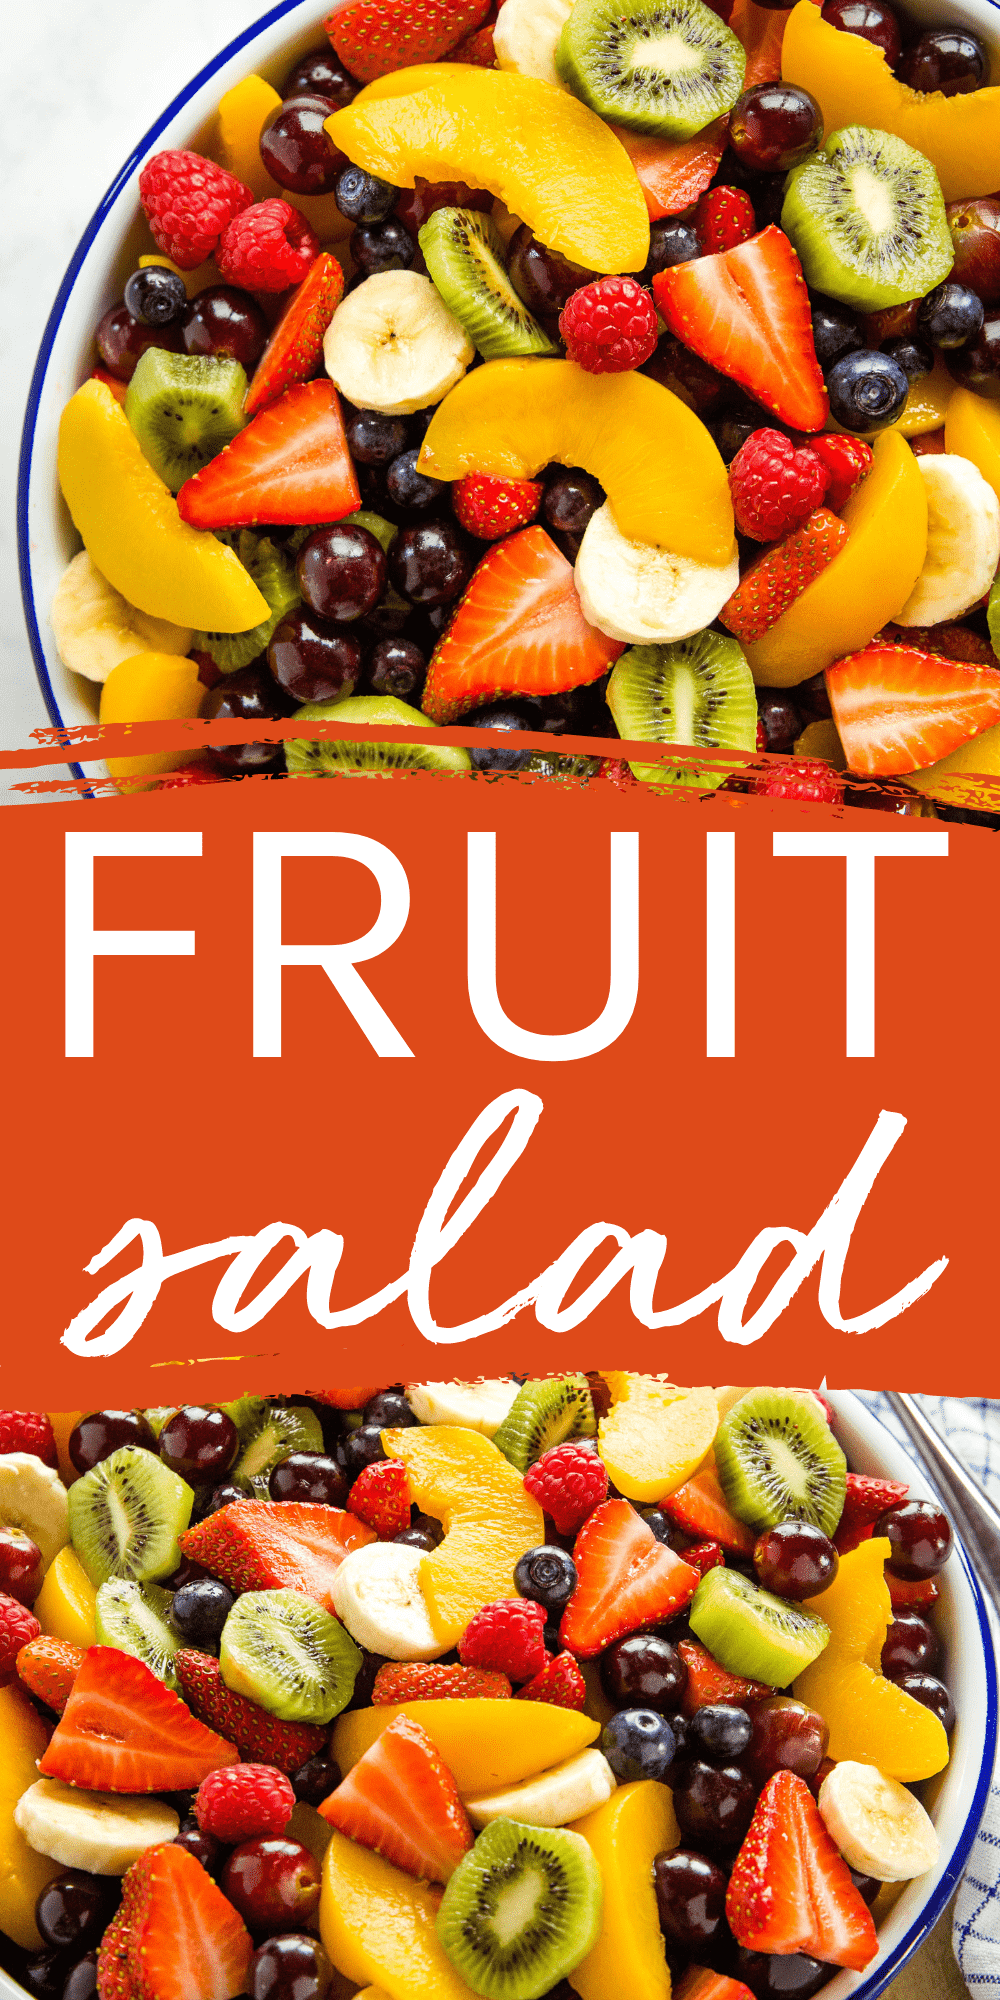 This Easy Fruit Salad recipe is the best healthy dessert, perfect for breakfast or brunch. Made with fresh & canned fruit - ready in minutes! Recipe from thebusybaker.ca! #fruitsalad #healthy #fruit #plantbased #breakfast #brunch #recipe #easyfruitsalad #fruitsaladrecipe via @busybakerblog